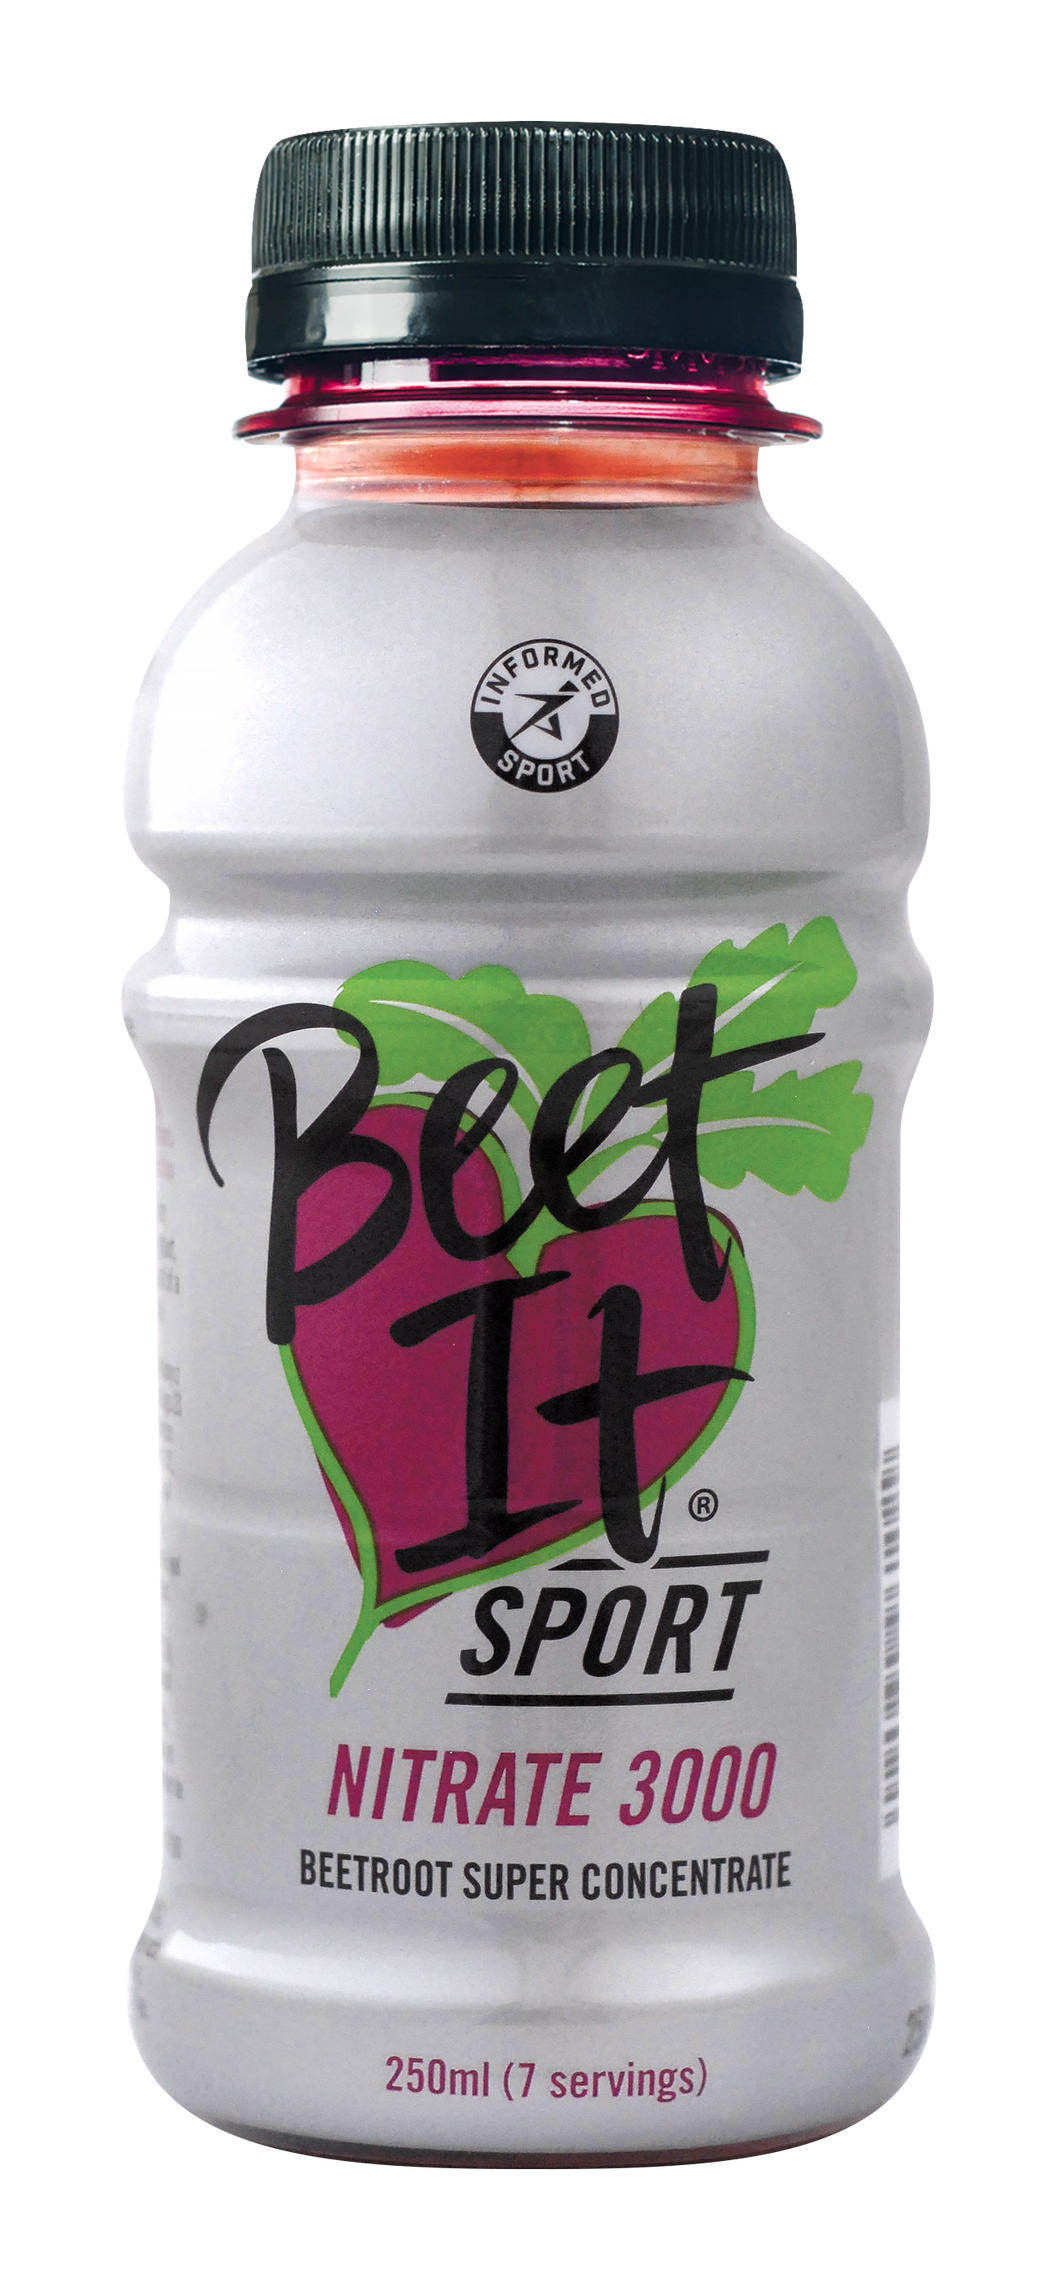 Beet It Sport Nitrate 3000 Super Concentrate - 2 Box 12x250ml